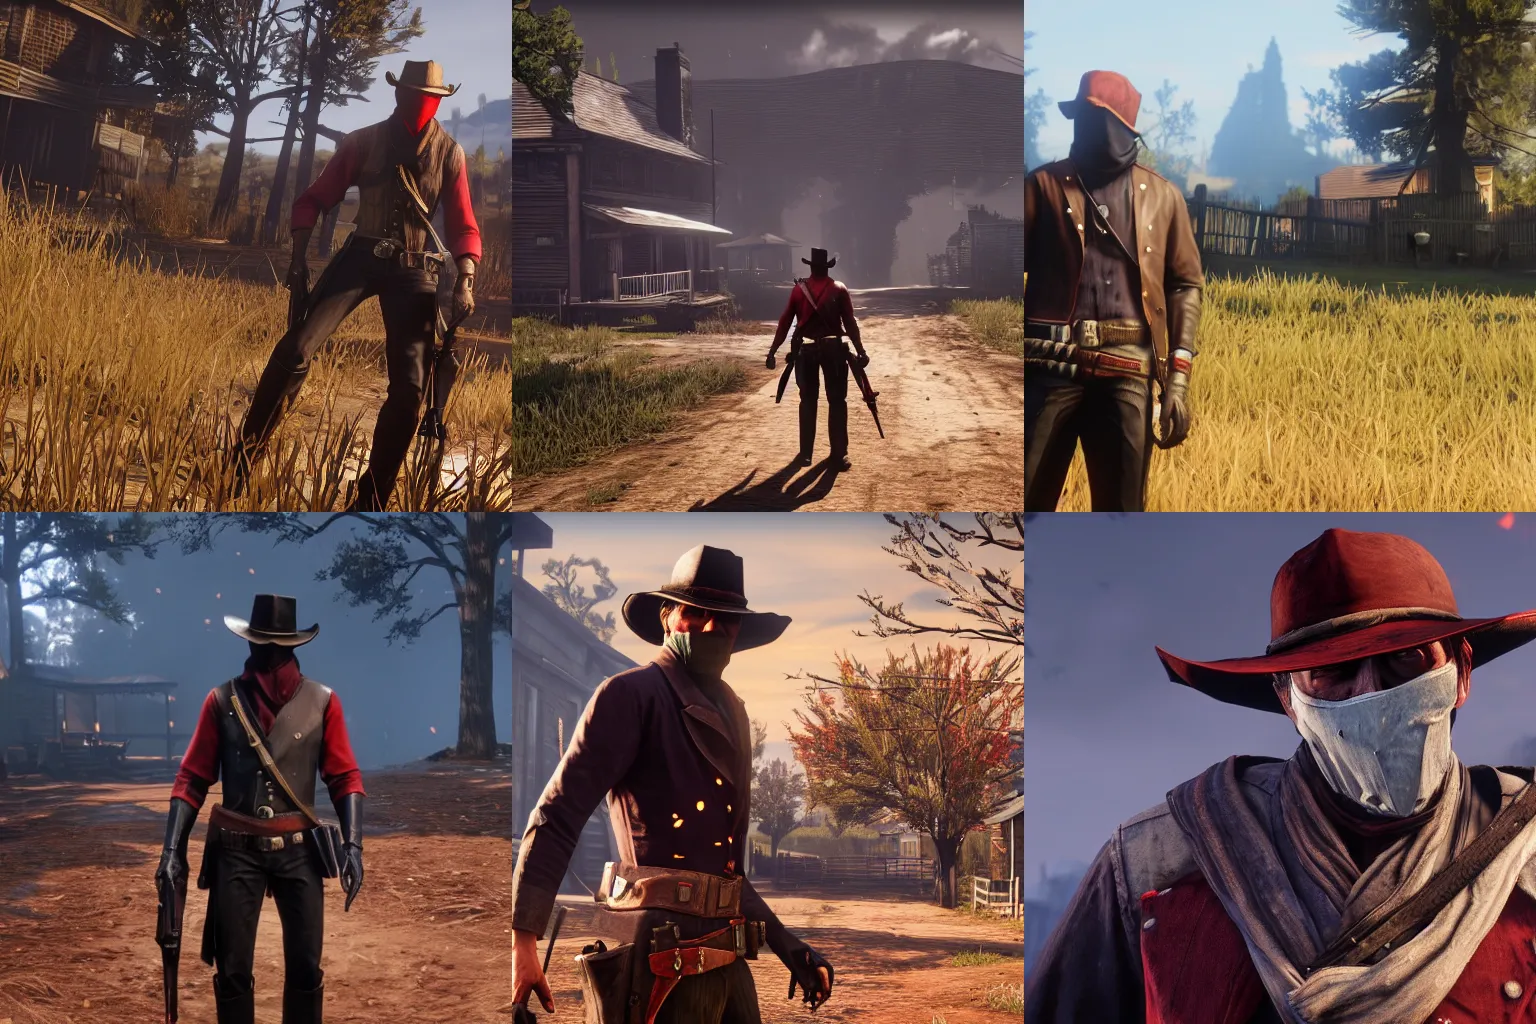 jhin in red dead redemption 2, ps5 screenshot, red dead redemption